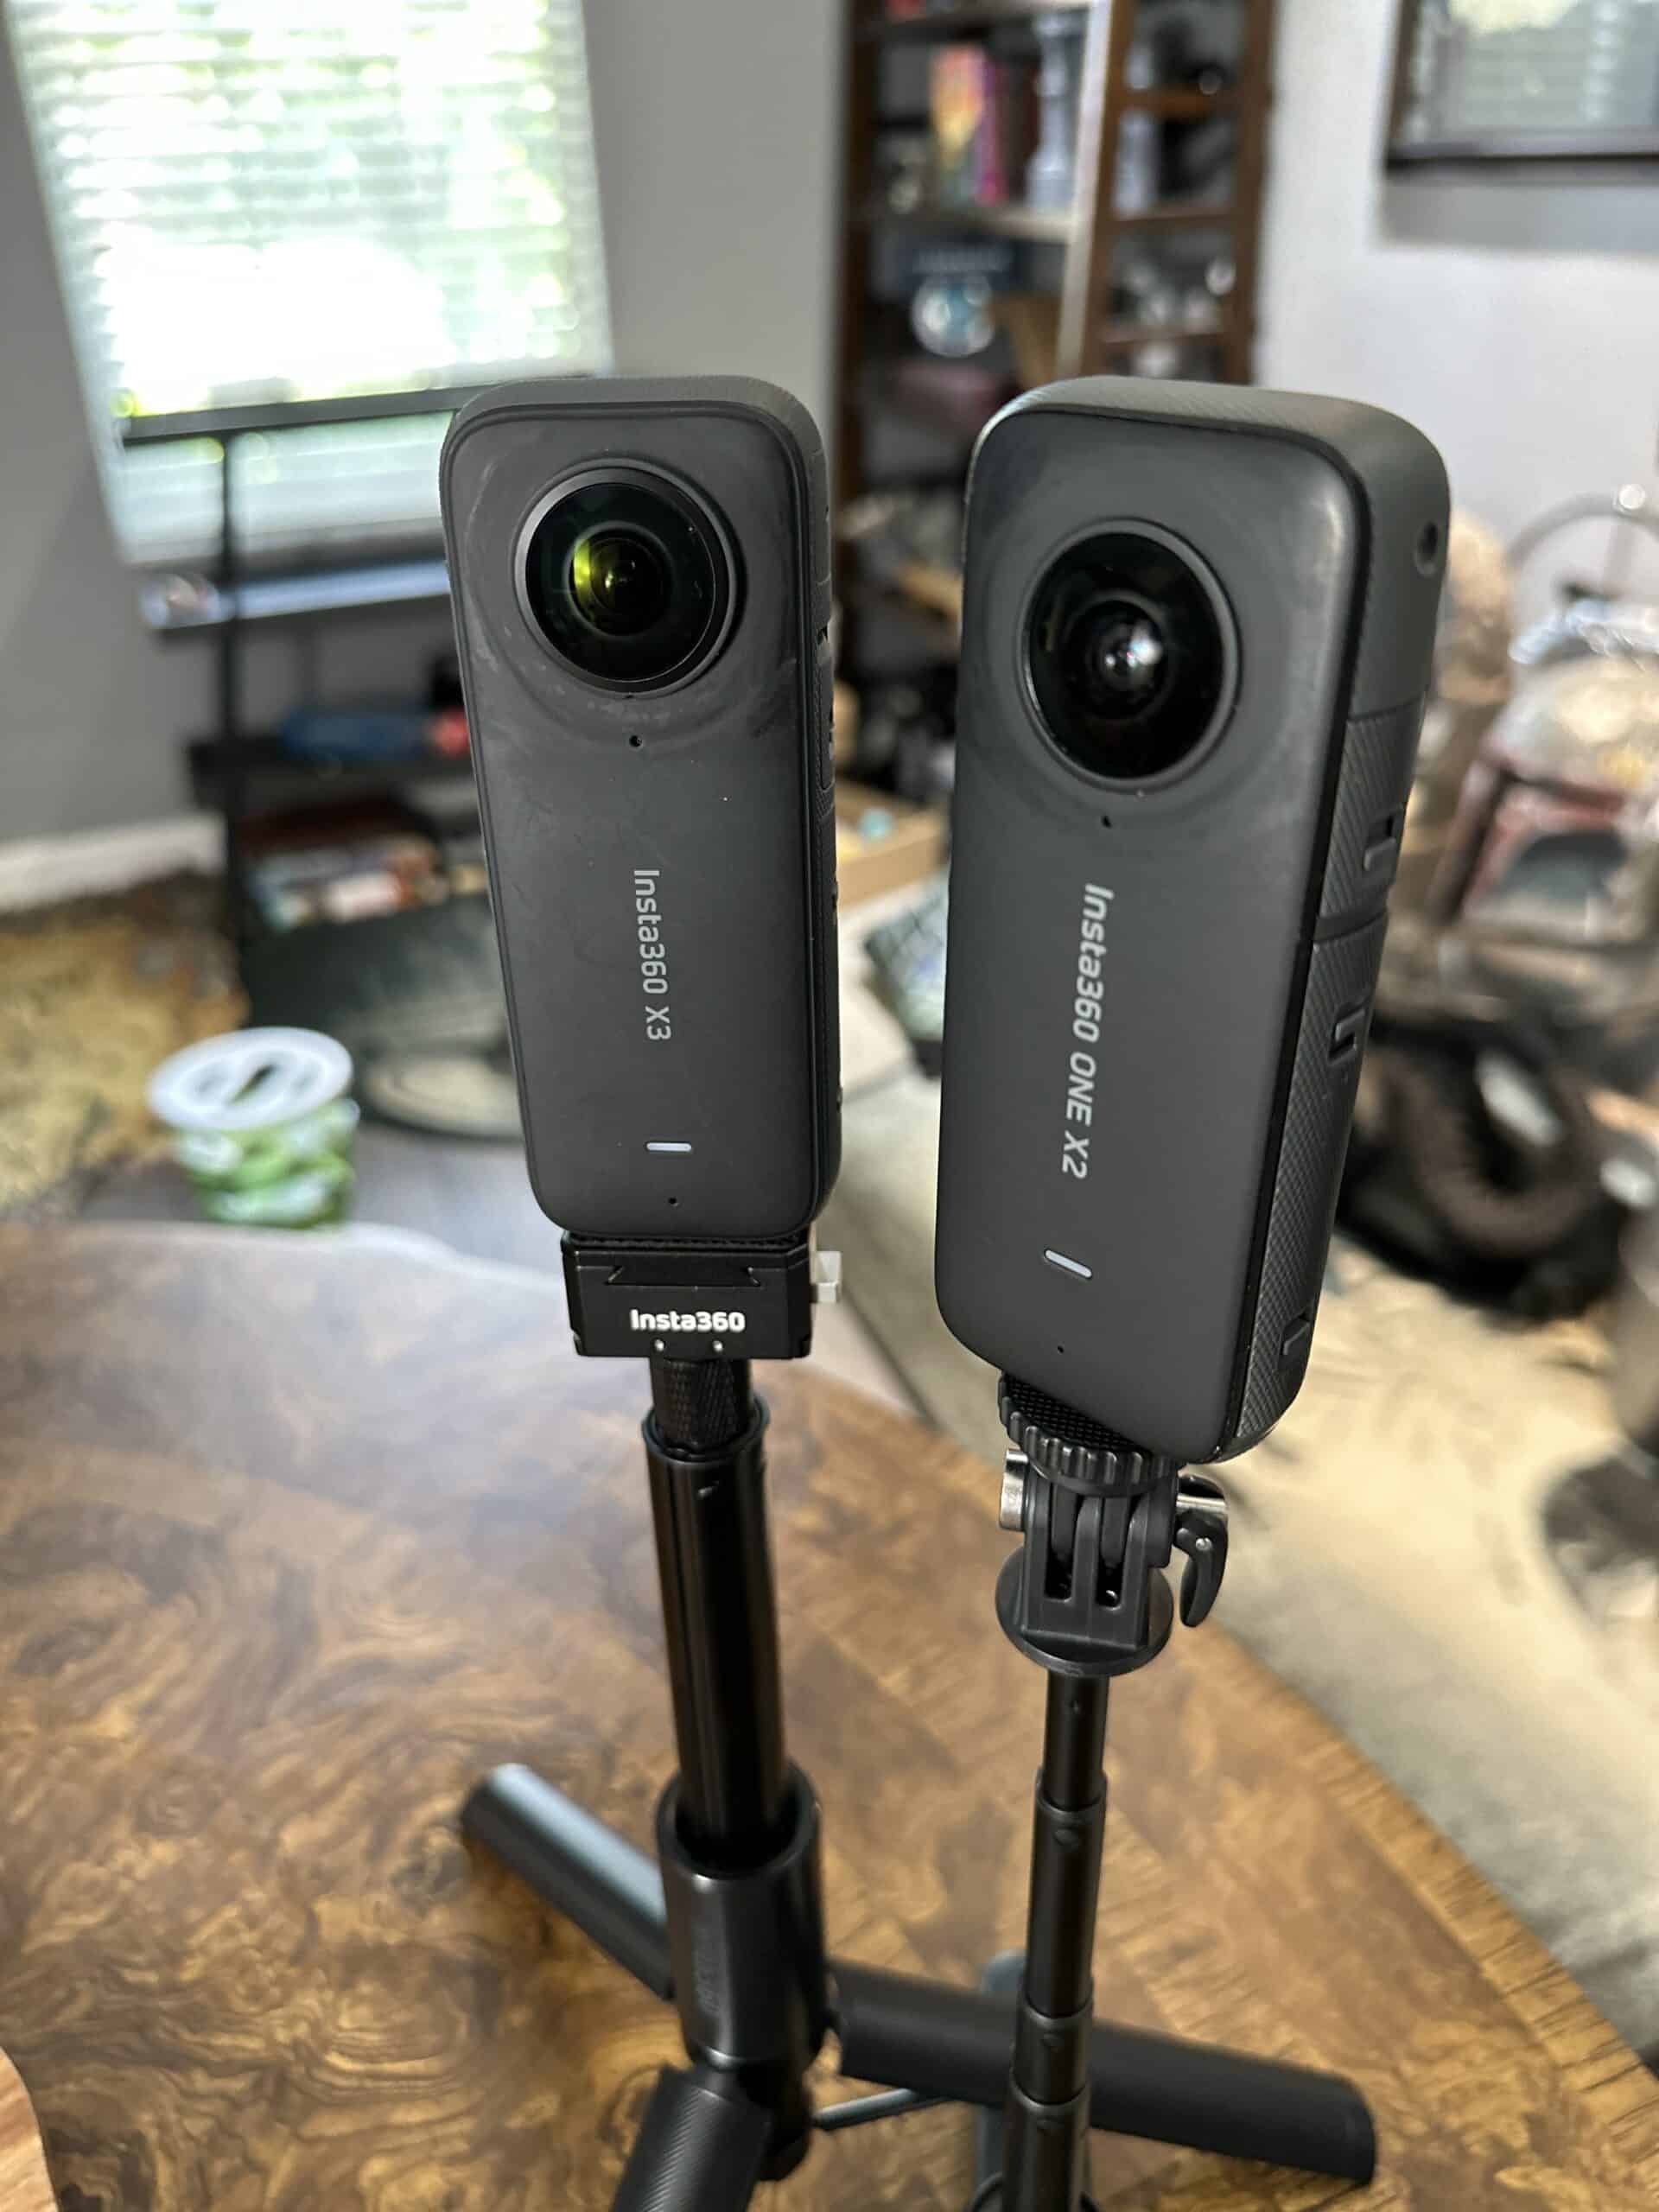 Insta360 X2 and X3 on selfie sticks - what I have used for my travels for last few years